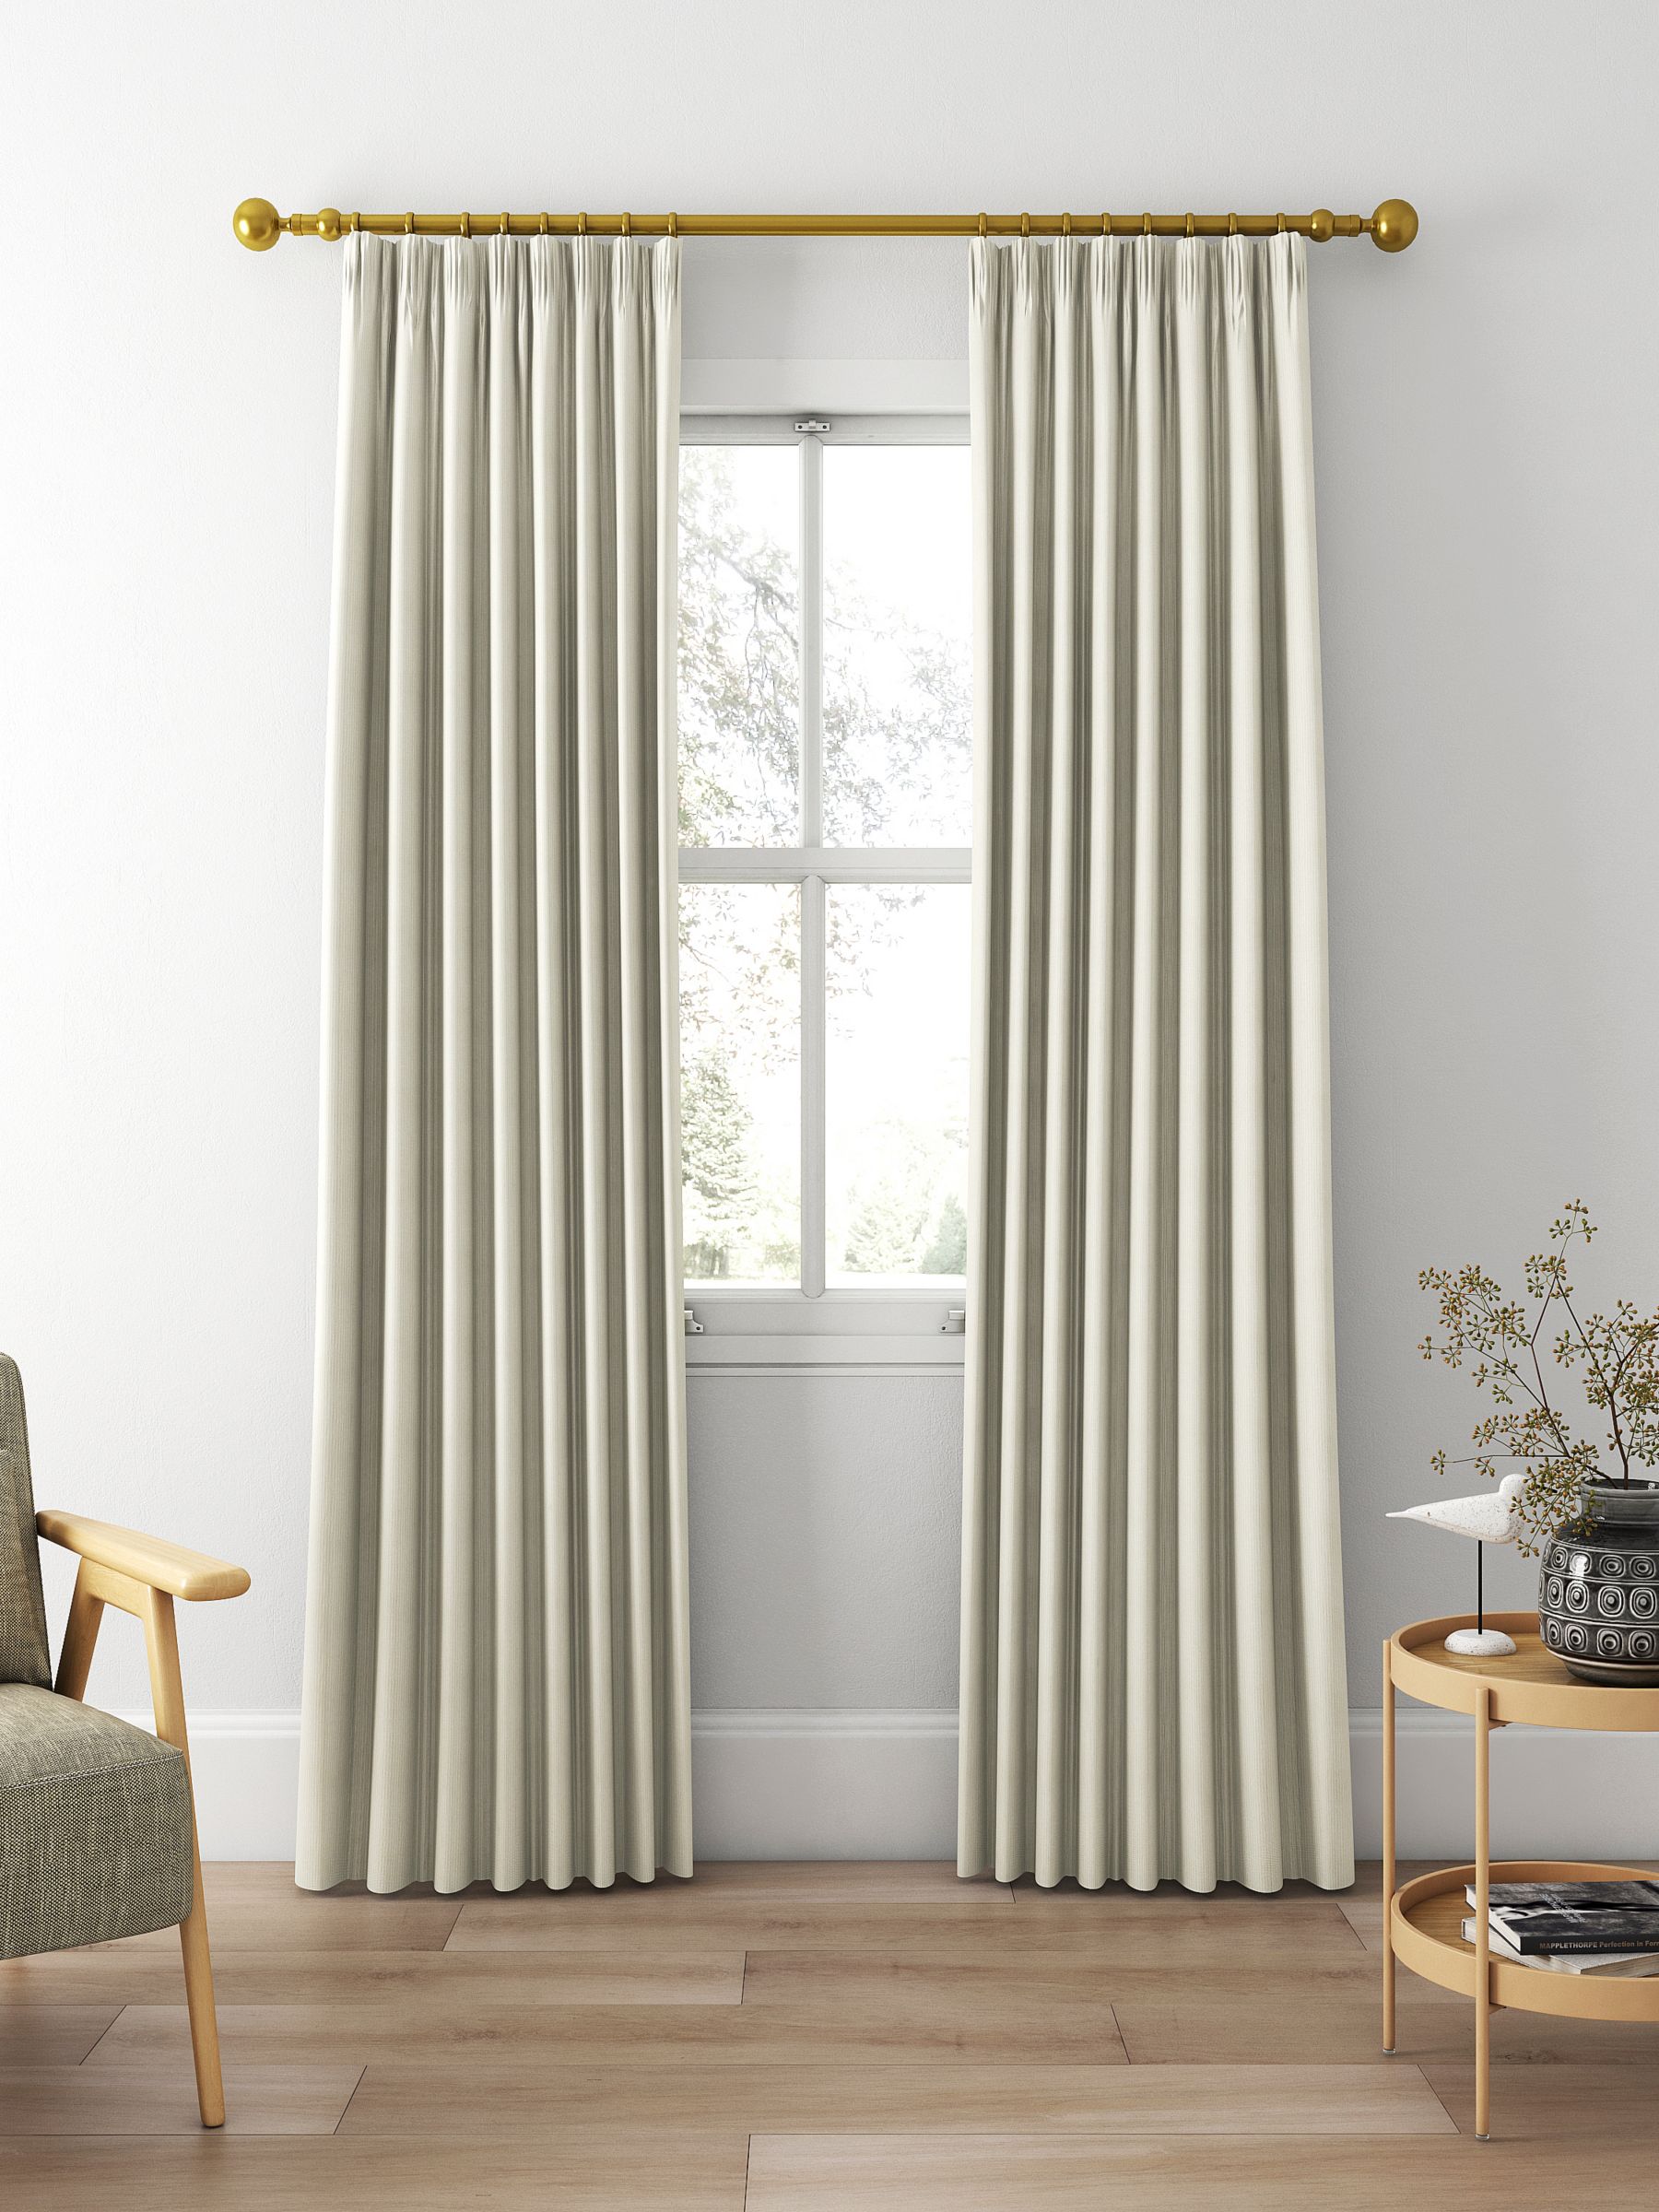 Clarke & Clarke Spencer Made to Measure Curtains, Linen